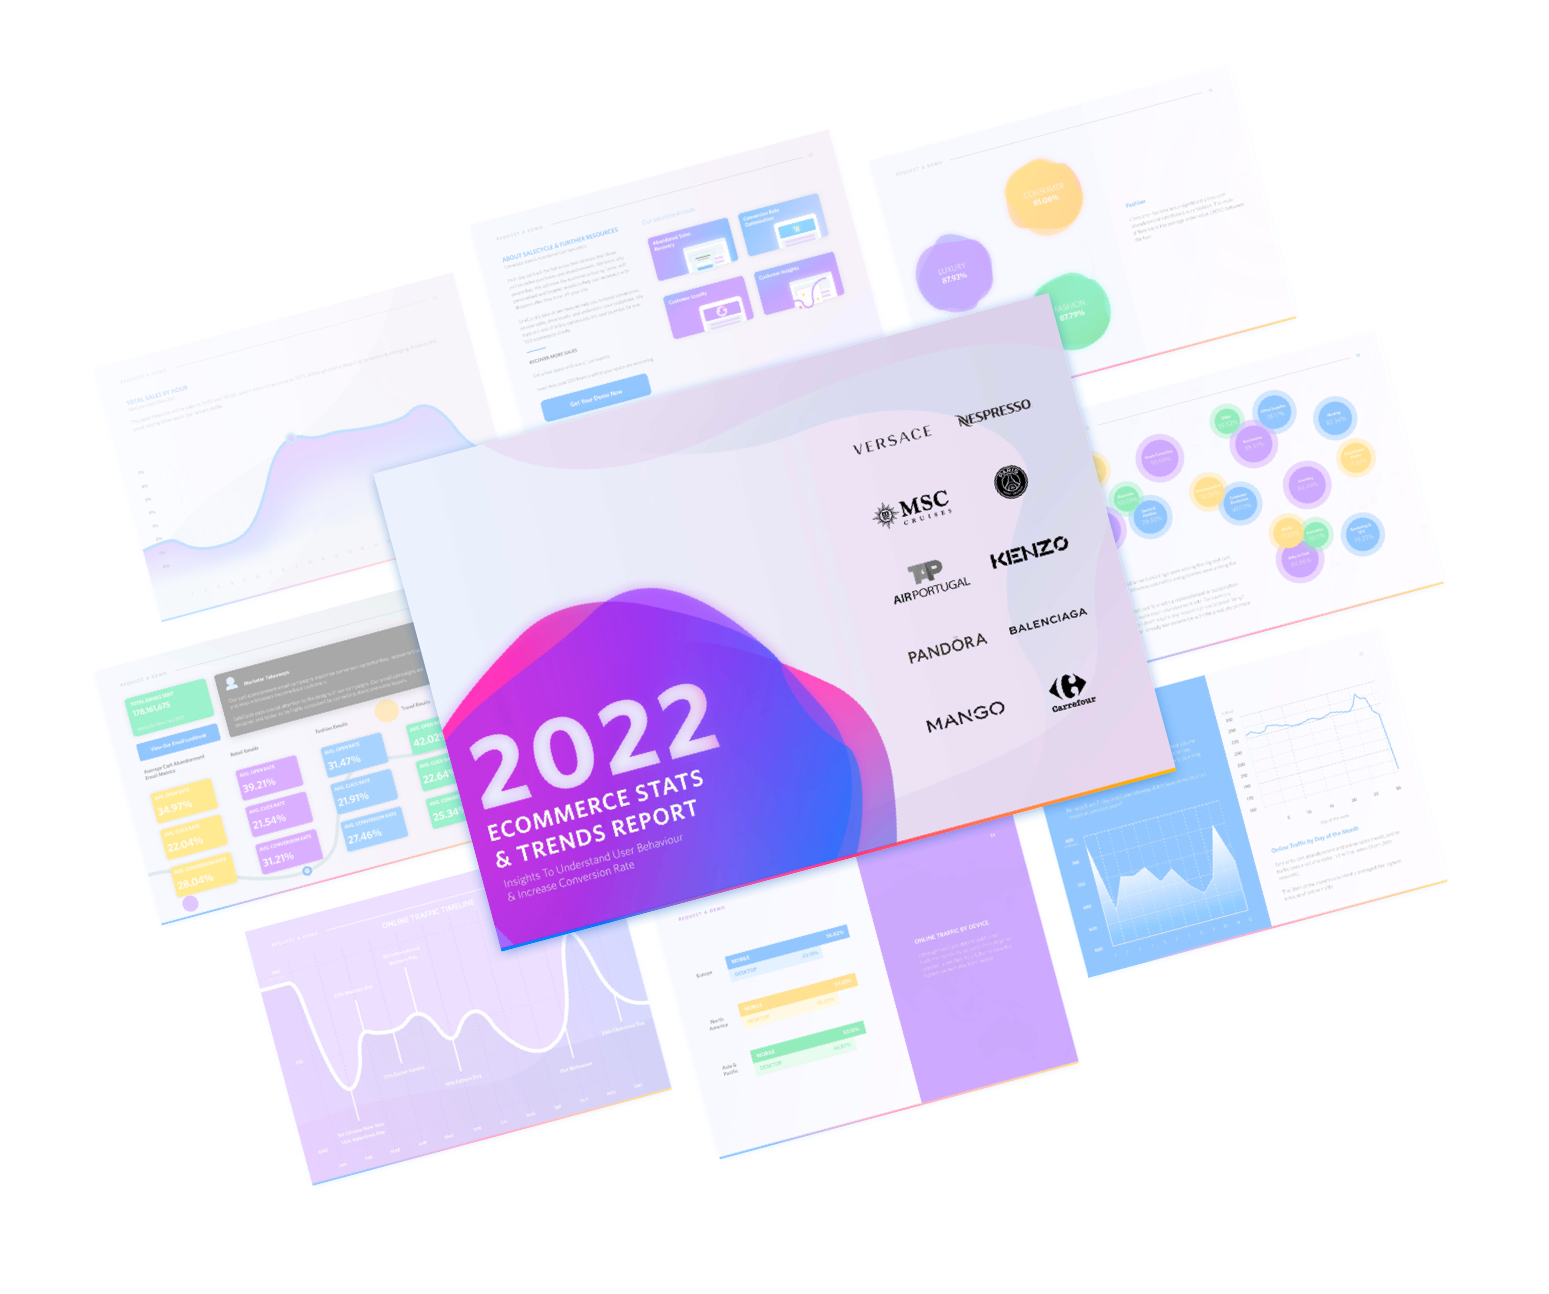 2022 Ecommerce Stats and Trends Report